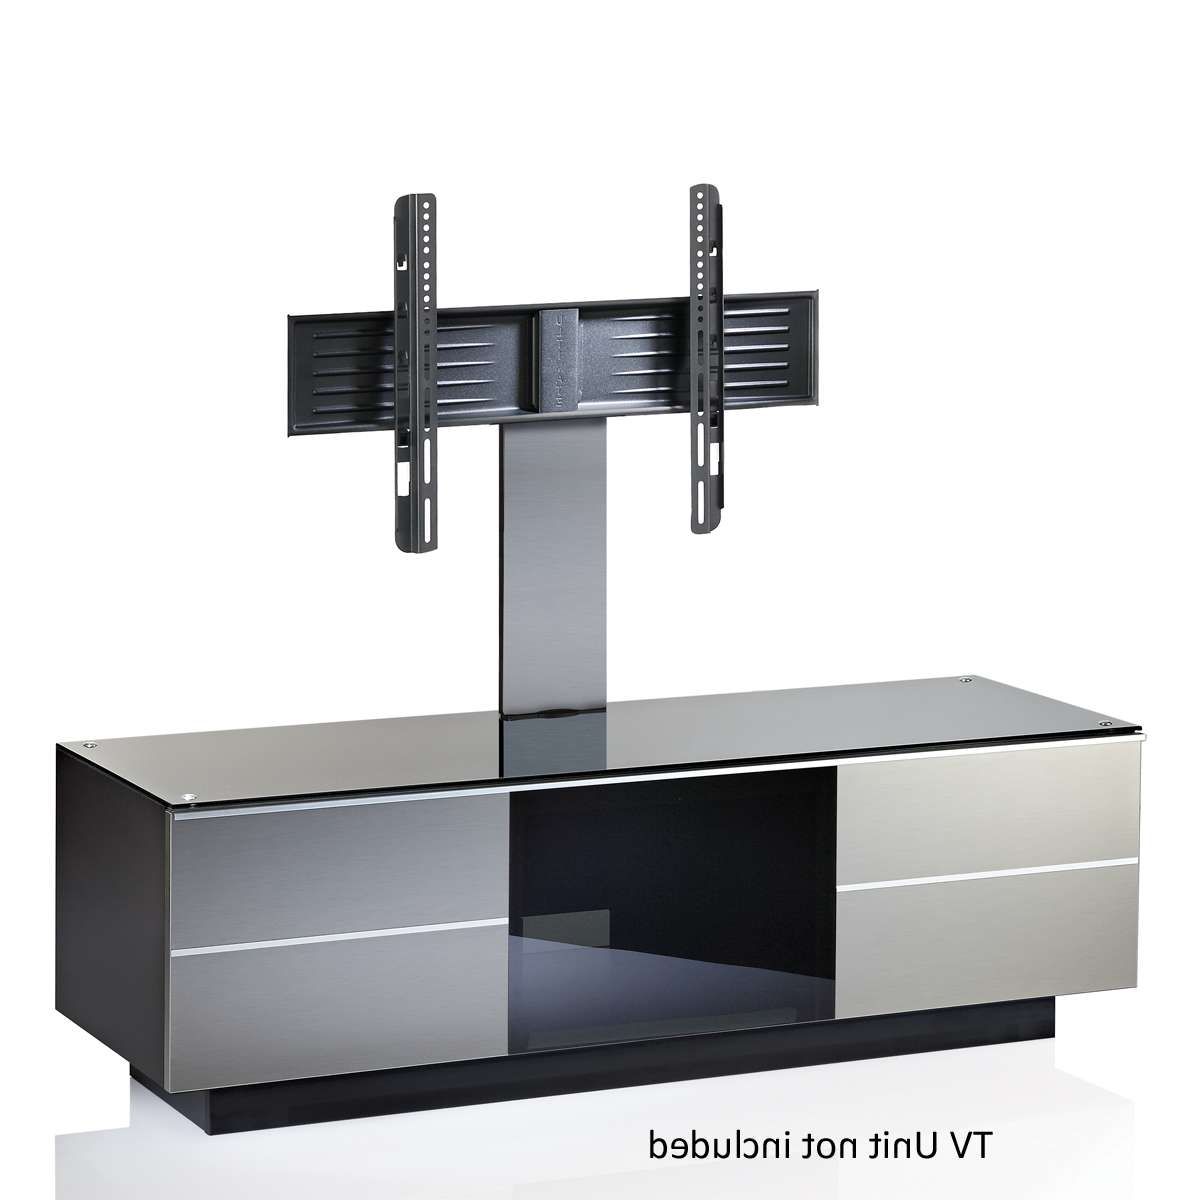 Inox G B 80 Inx Cantilever Tv Bracket,ukcf Ultimate,,uk Cf Pertaining To Tv Stands With Bracket (Gallery 14 of 15)